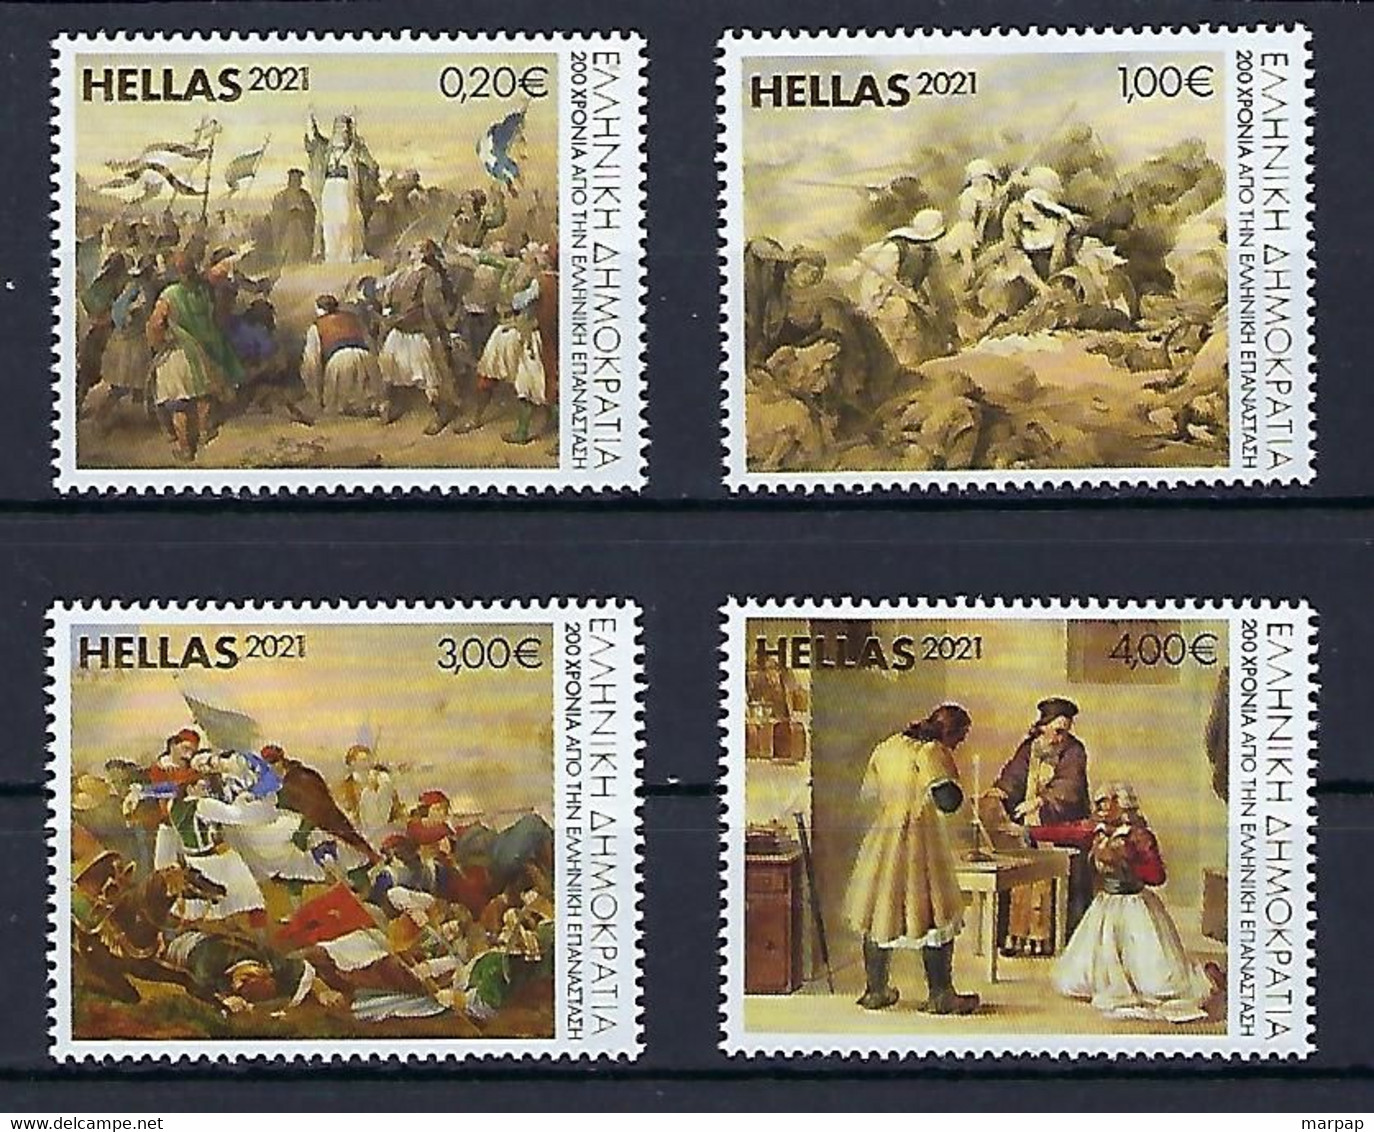 Greece, 2021 2nd Issue, MNH - Unused Stamps